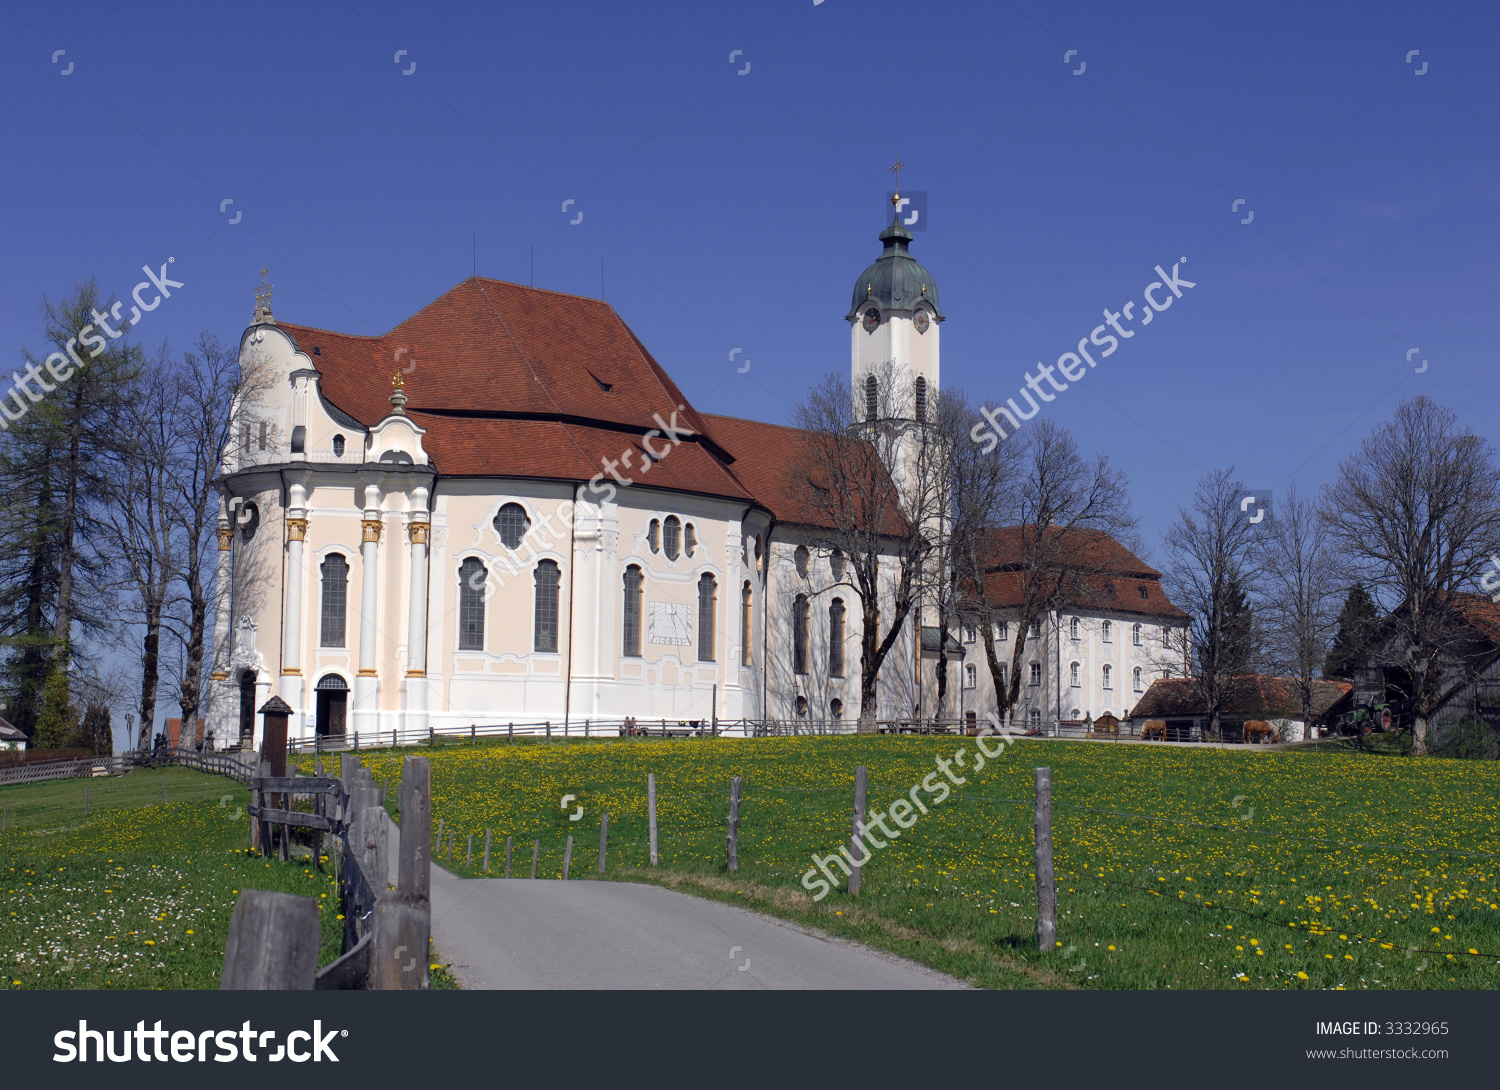 Bavarian Wieskirche, One Of The Most Famous Places Of Pilgrimage.